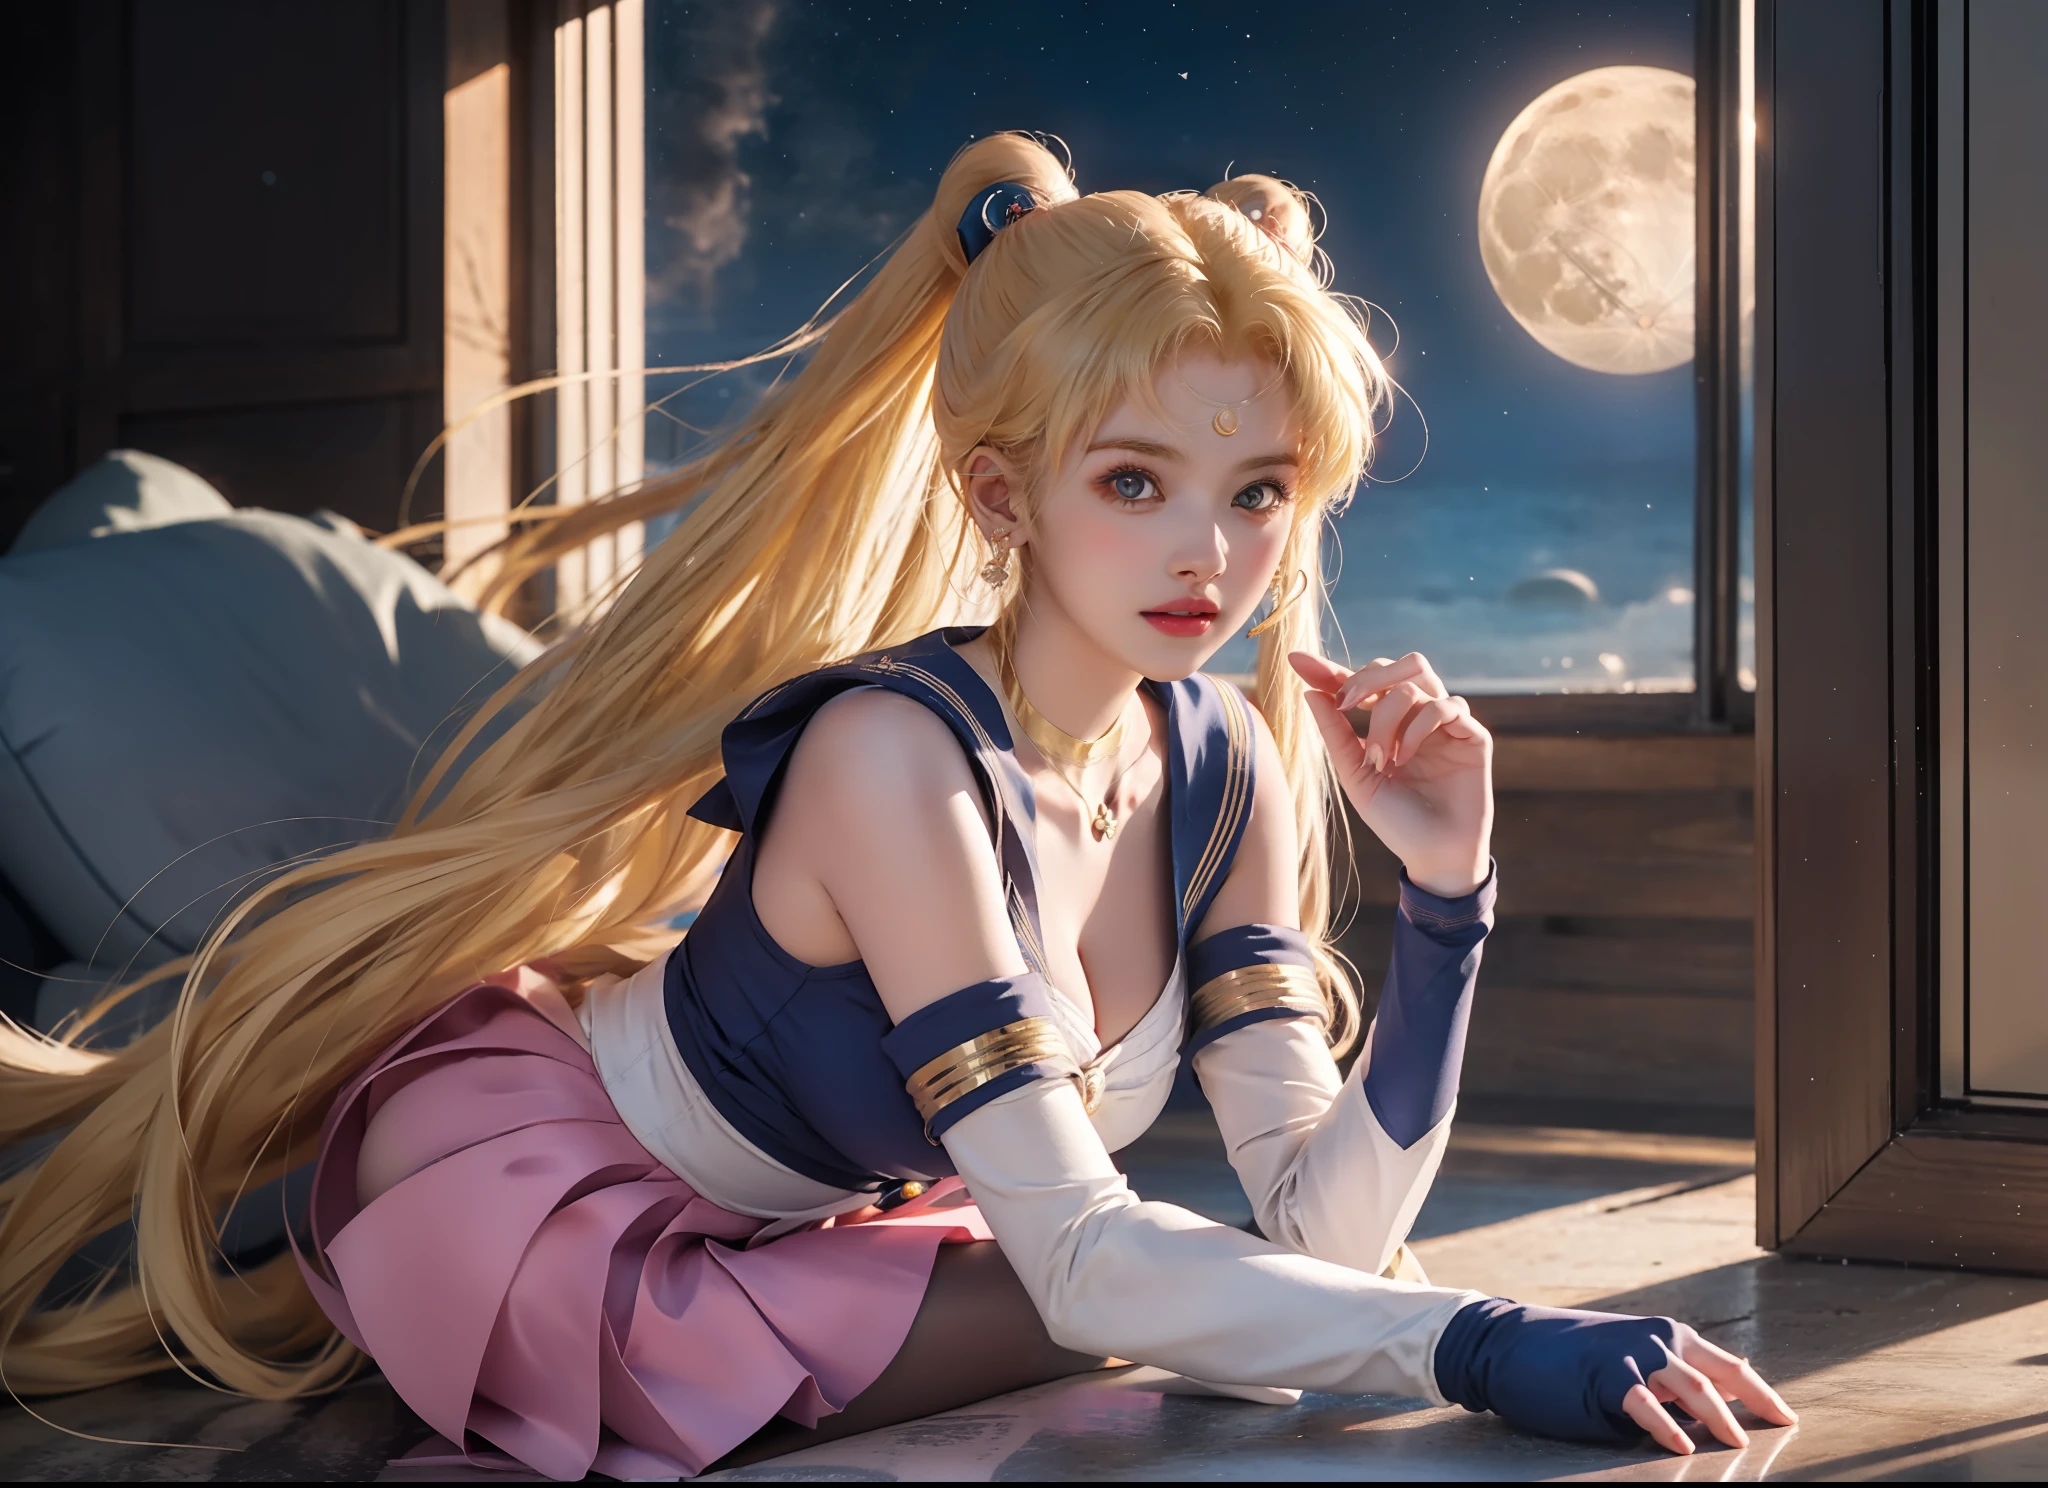 sailor moon is a sailor girl with long blonde hair and a pink skirt, sailor moon!!!!!!!!, sailor moon aesthetic, sailor moon style, inspired by Sailor Moon, the sailor moon. beautiful, by Sailor Moon, also known as artemis the selene, also known as artemis or selene, an retro anime image, goddess of the moon, inspired by Naoko Takeuchi, big boobs, gigantic , busty, cleavage, show cleavage, skimpy dress, skimpy sailor dress, UHD